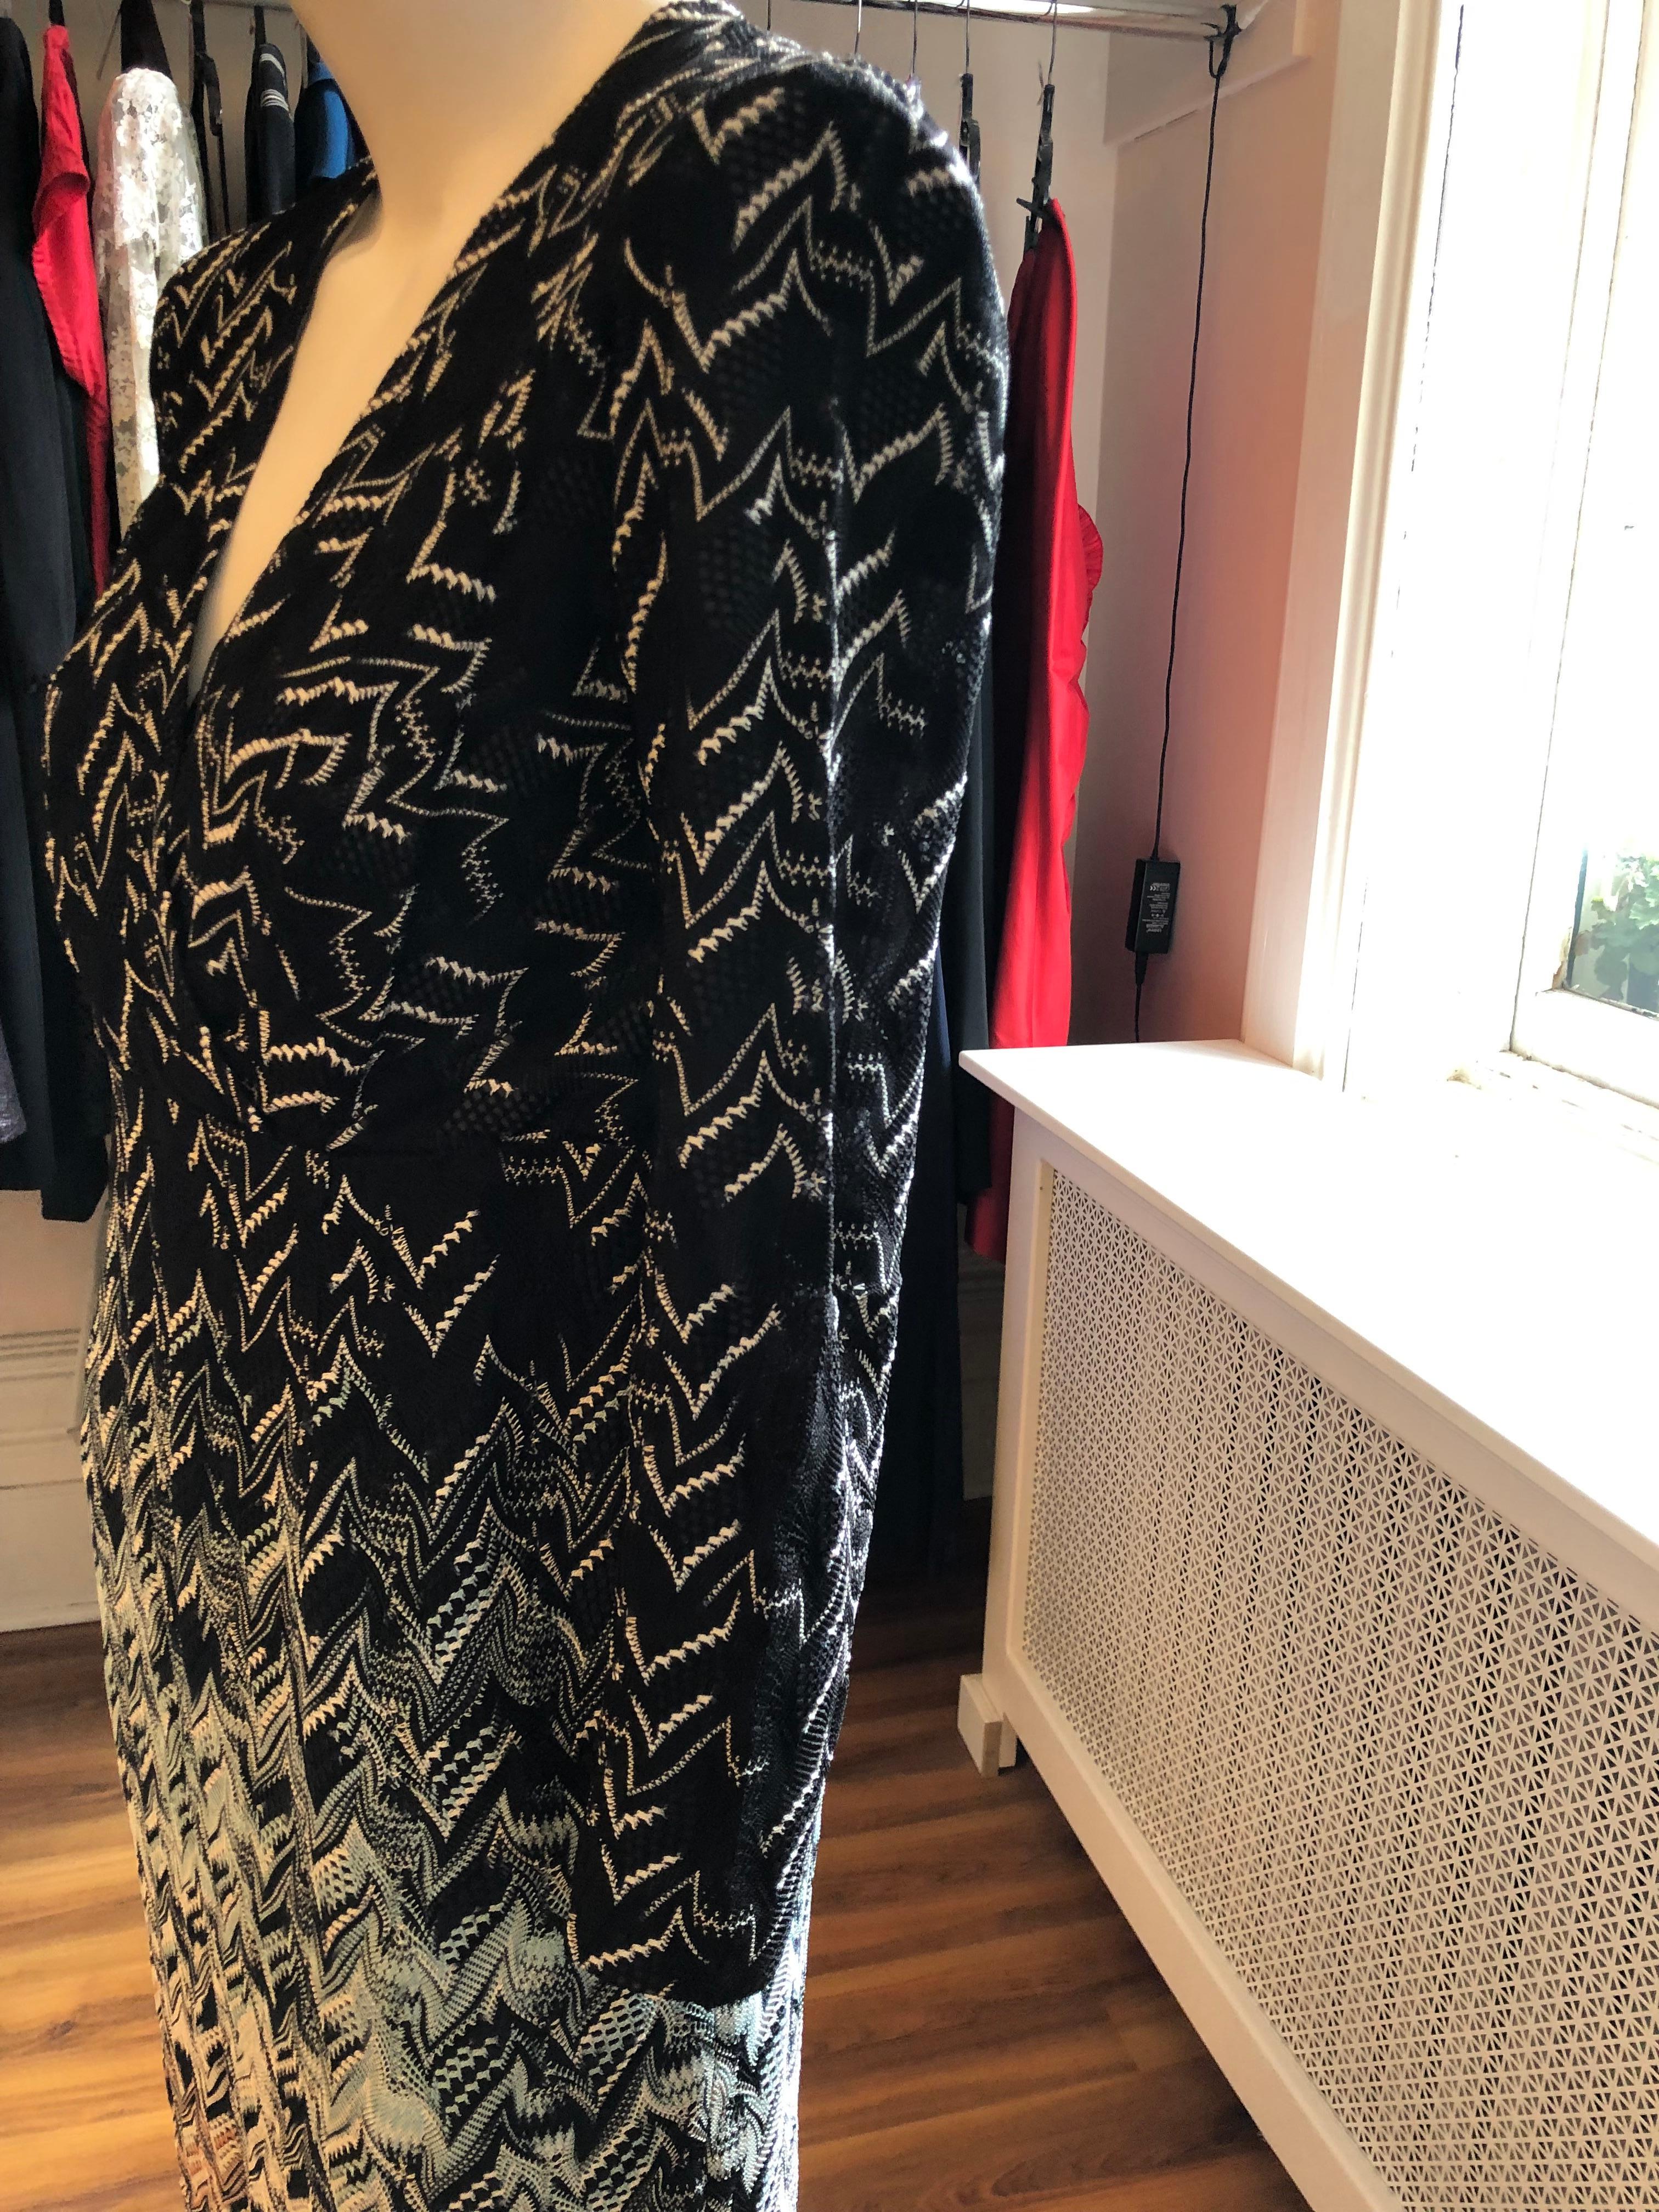 This dress has an unusual abstract zig zag pattern with an ombre graded look.  Black and white at the top with aqua, orange, black and white at the bottom. The neckline is v-shaped and closure is by a zipper on the side. Easy to wear day or evening!